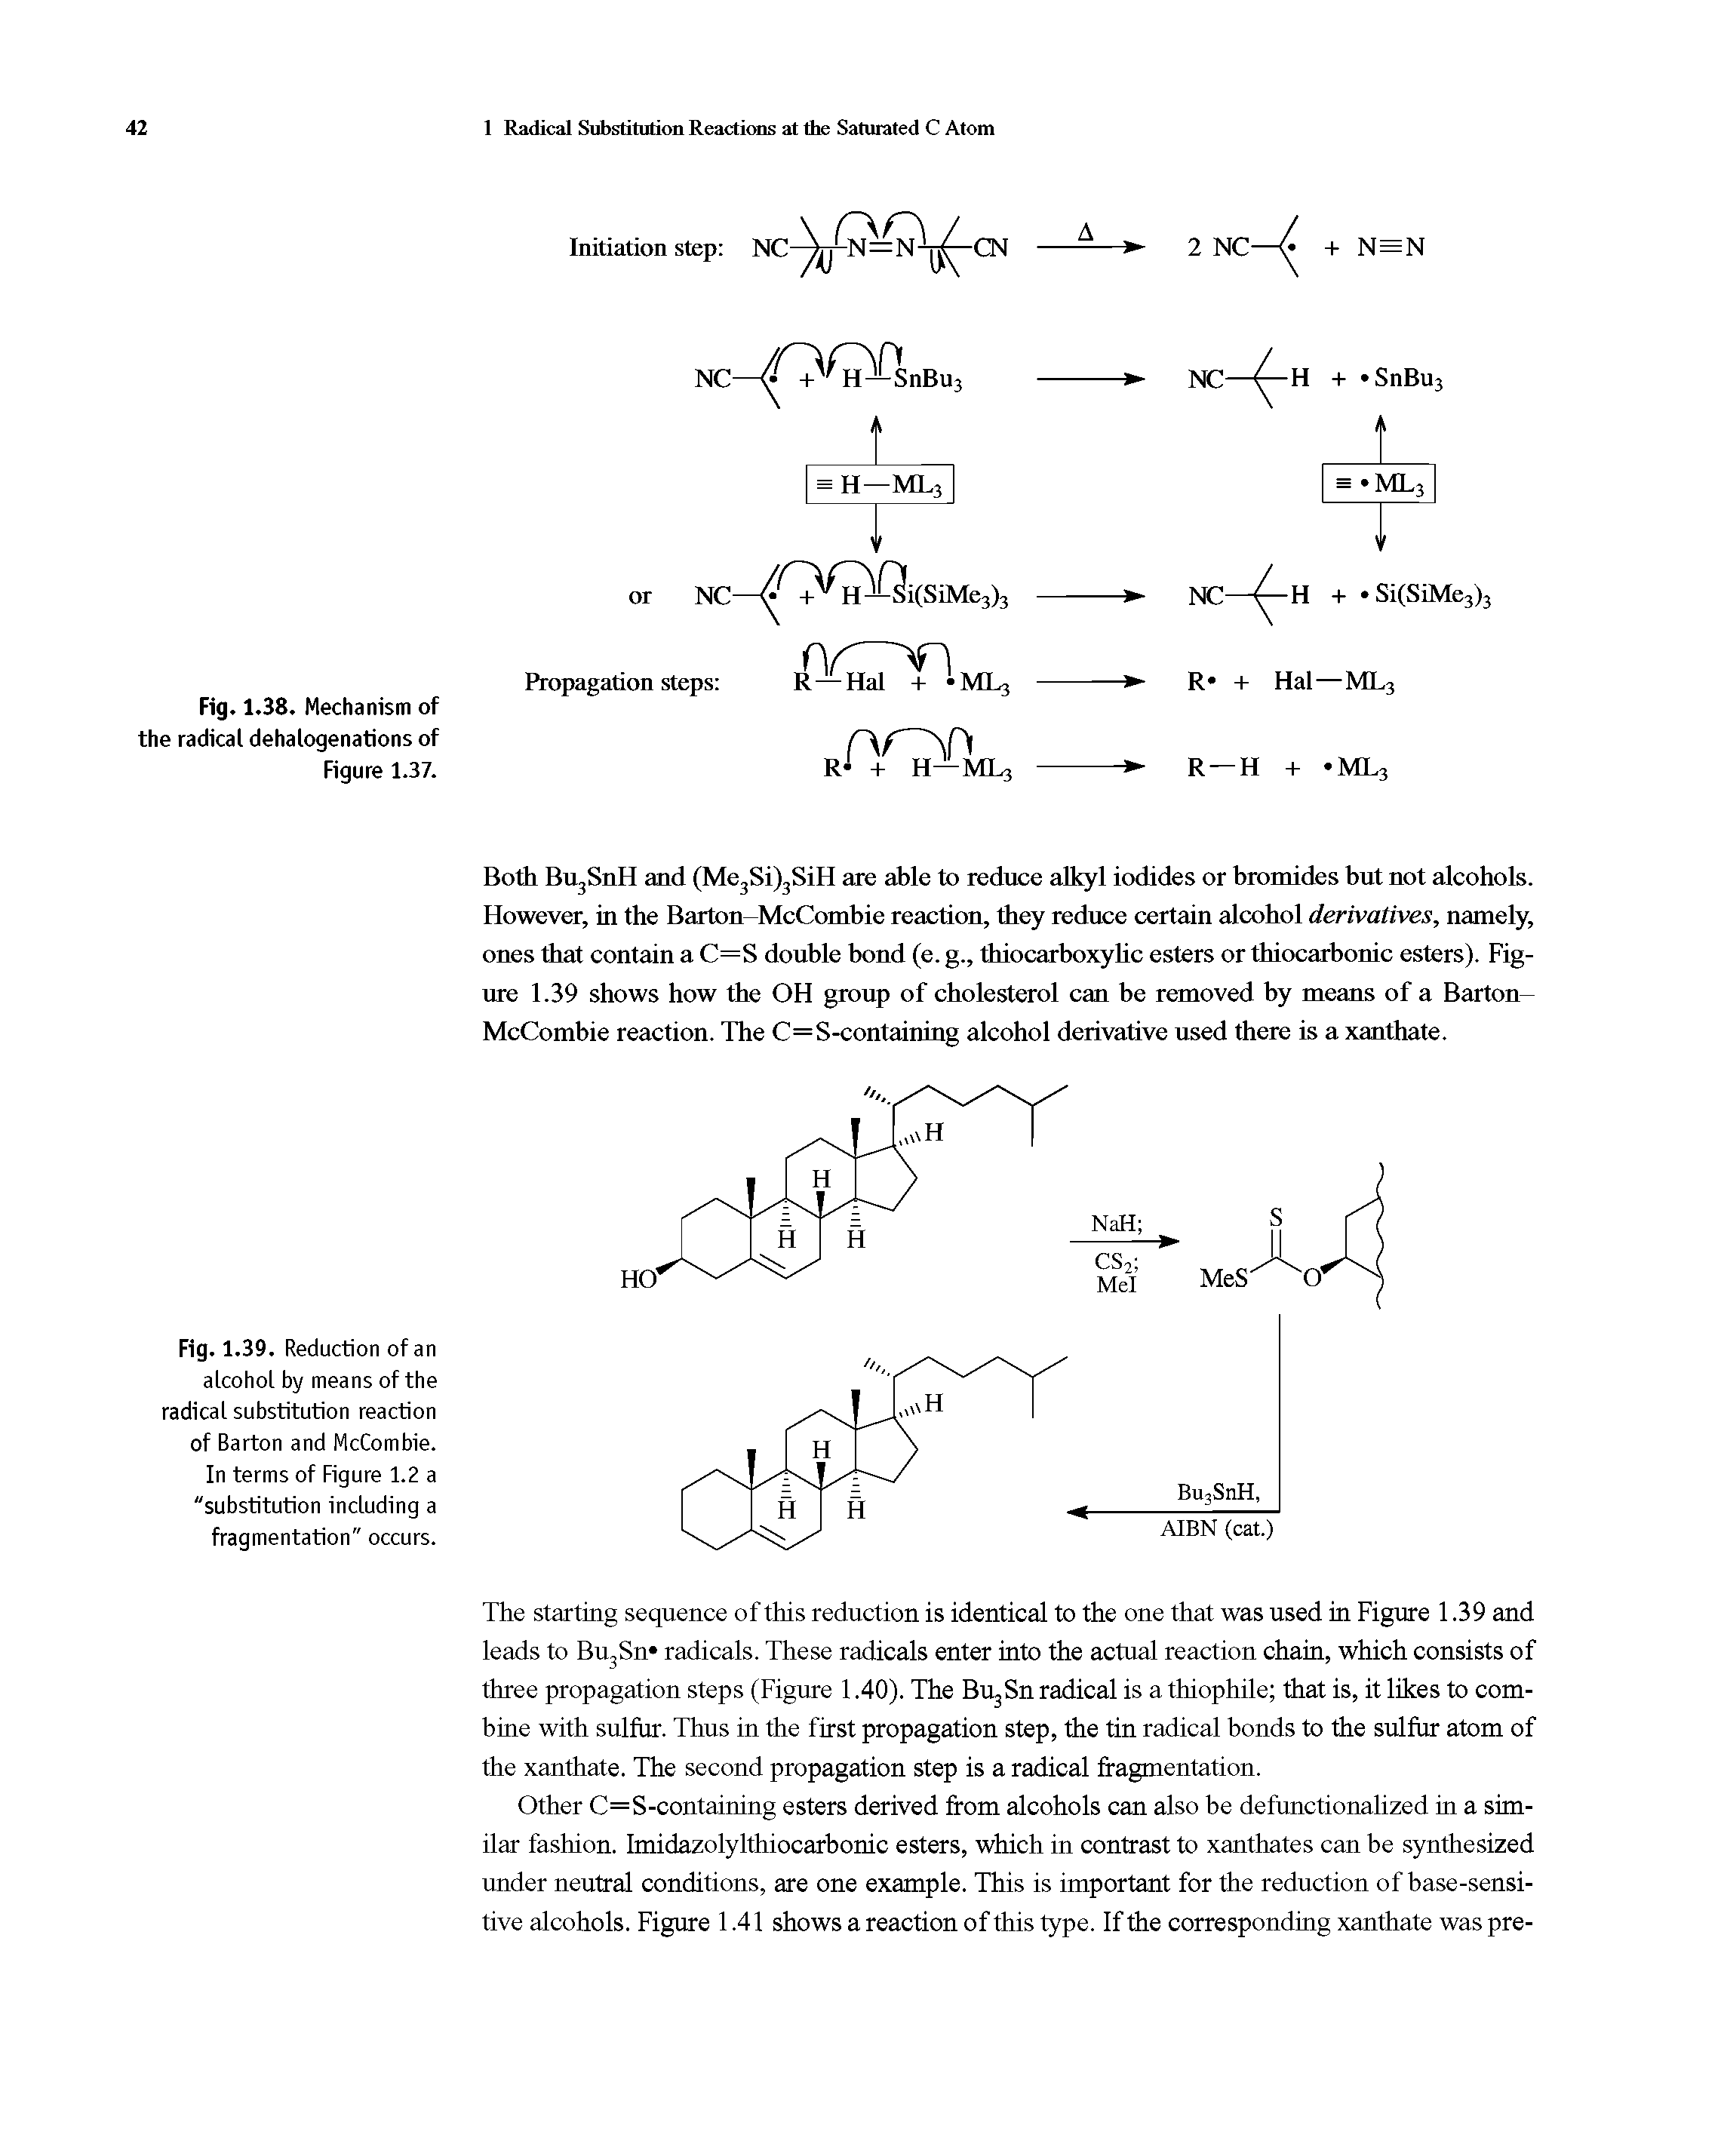 Fig. 1.39. Reduction of an alcohol by means of the radical substitution reaction of Barton and McCombie. In terms of Figure 1.2 a "substitution including a fragmentation" occurs.